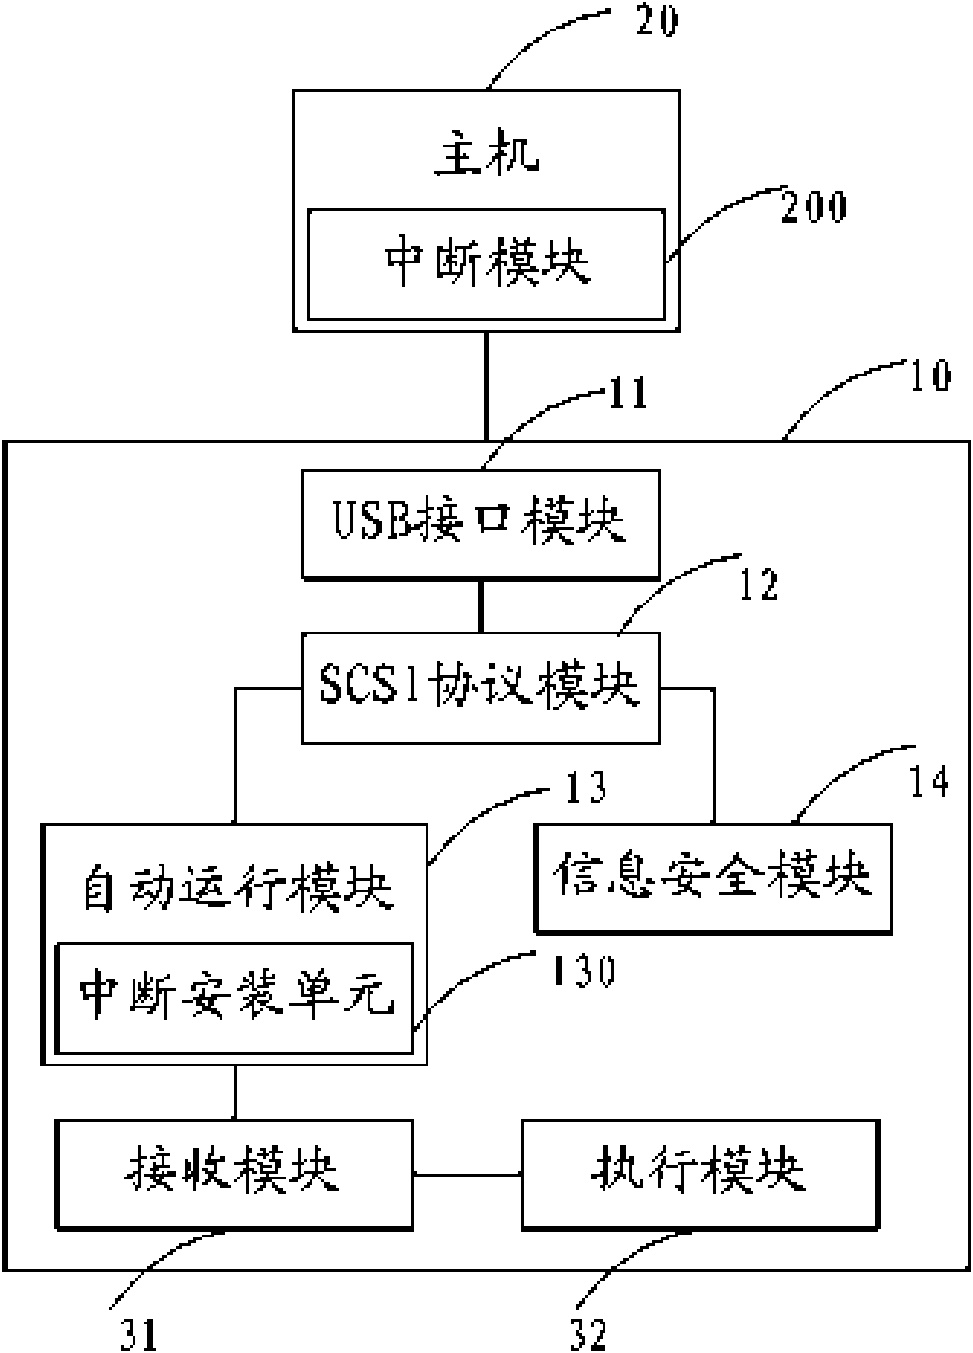 Information safety equipment, control method and system